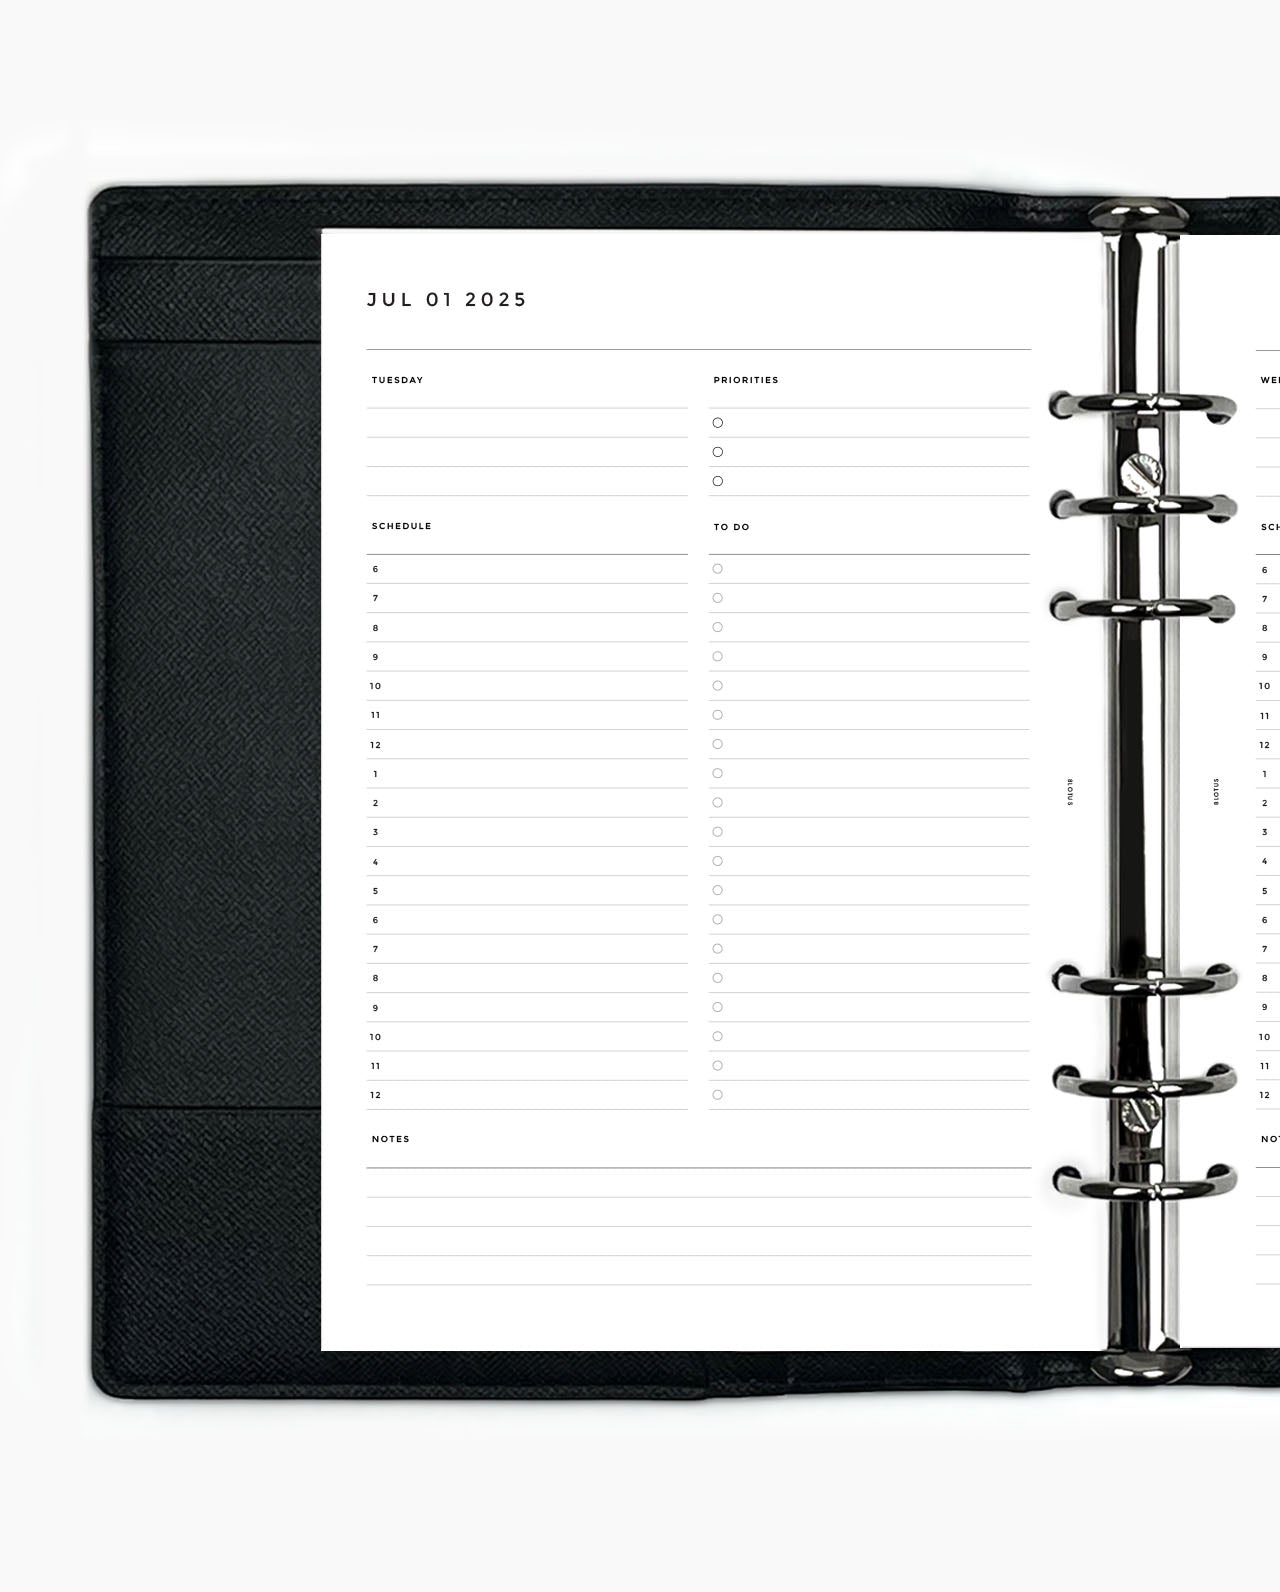 MN203 - 2025 Daily Planner - Hourly - DO1P